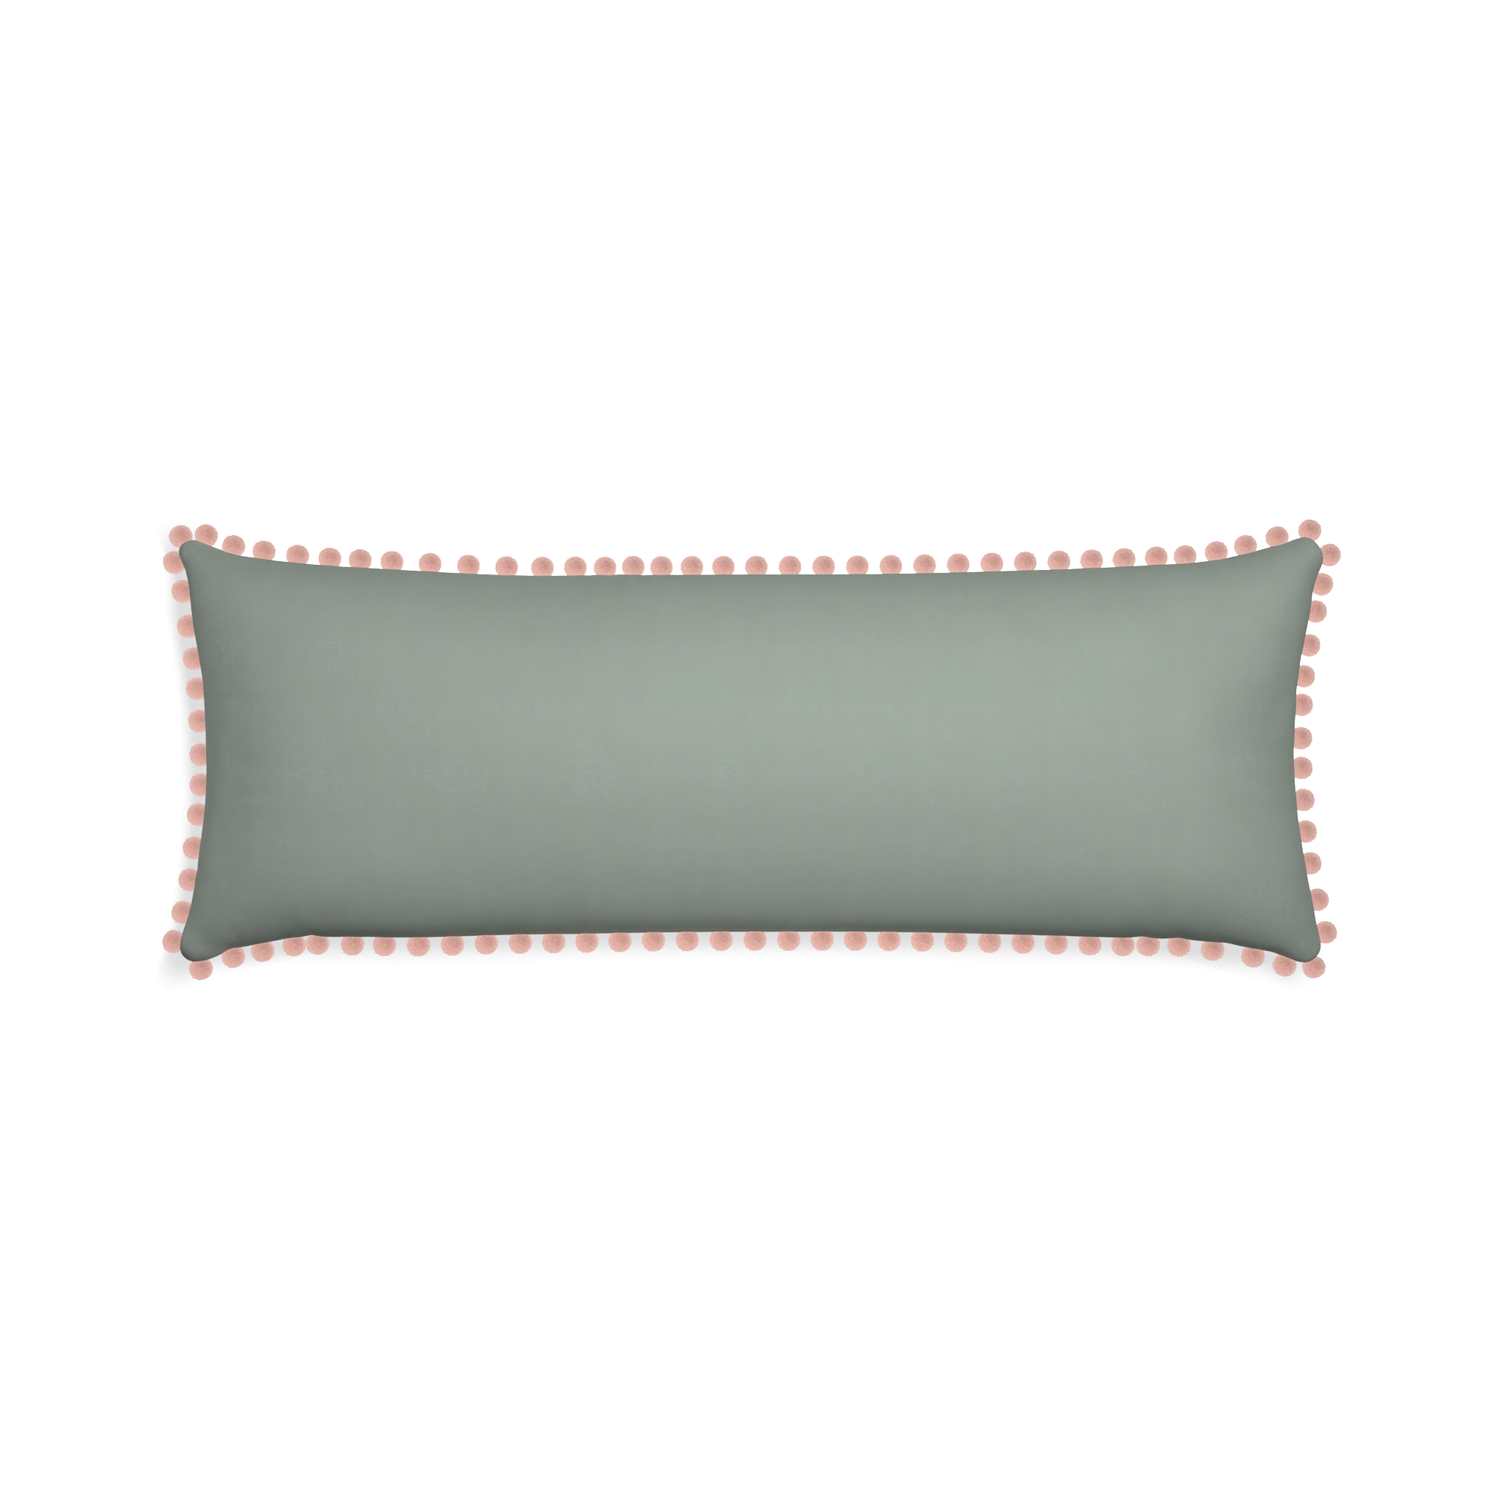 Xl-lumbar sage custom sage green cottonpillow with rose pom pom on white background